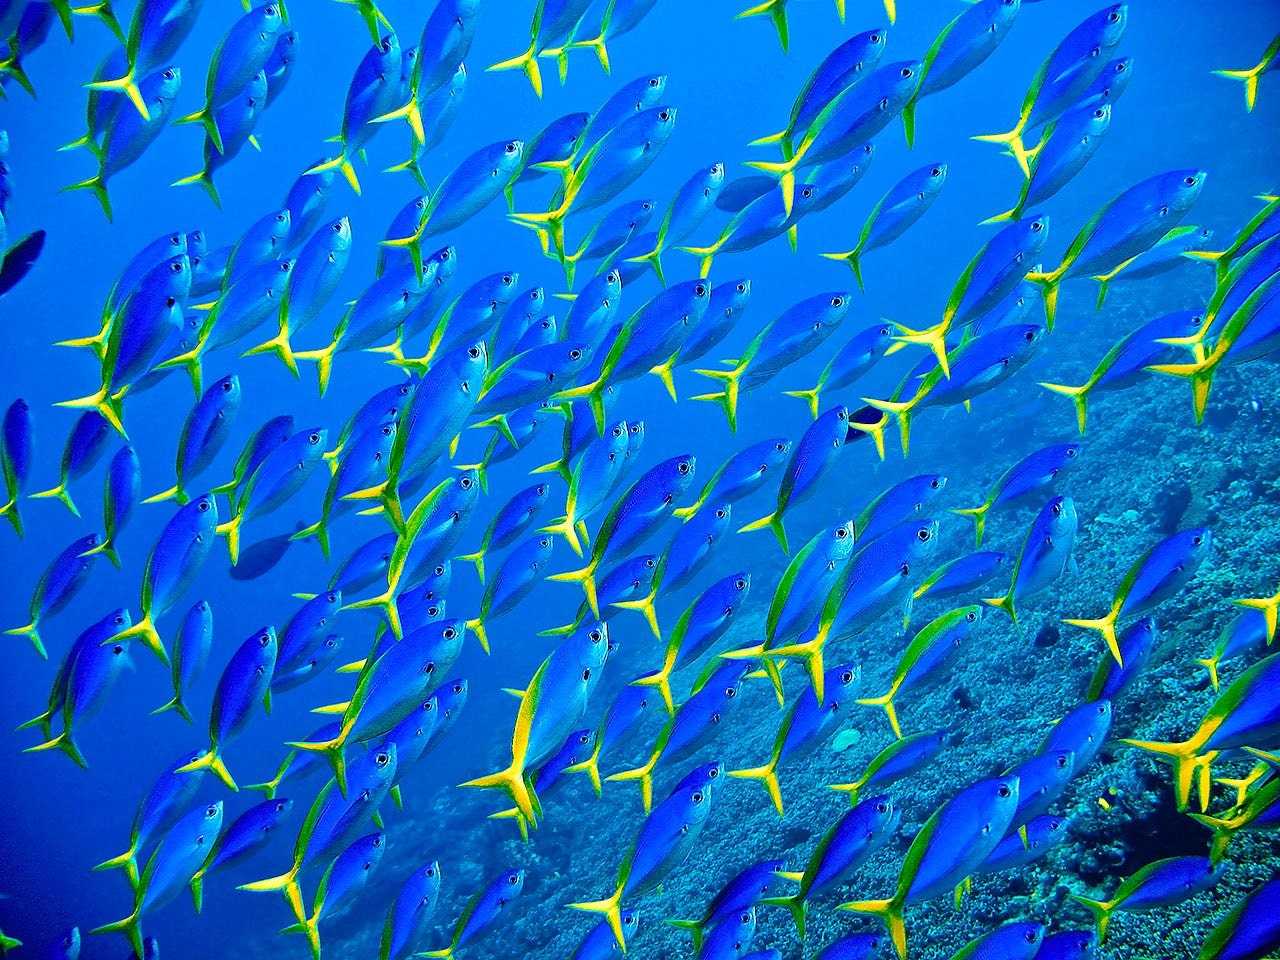 School of Yellow Tail Tropical Fish Underwater Photography